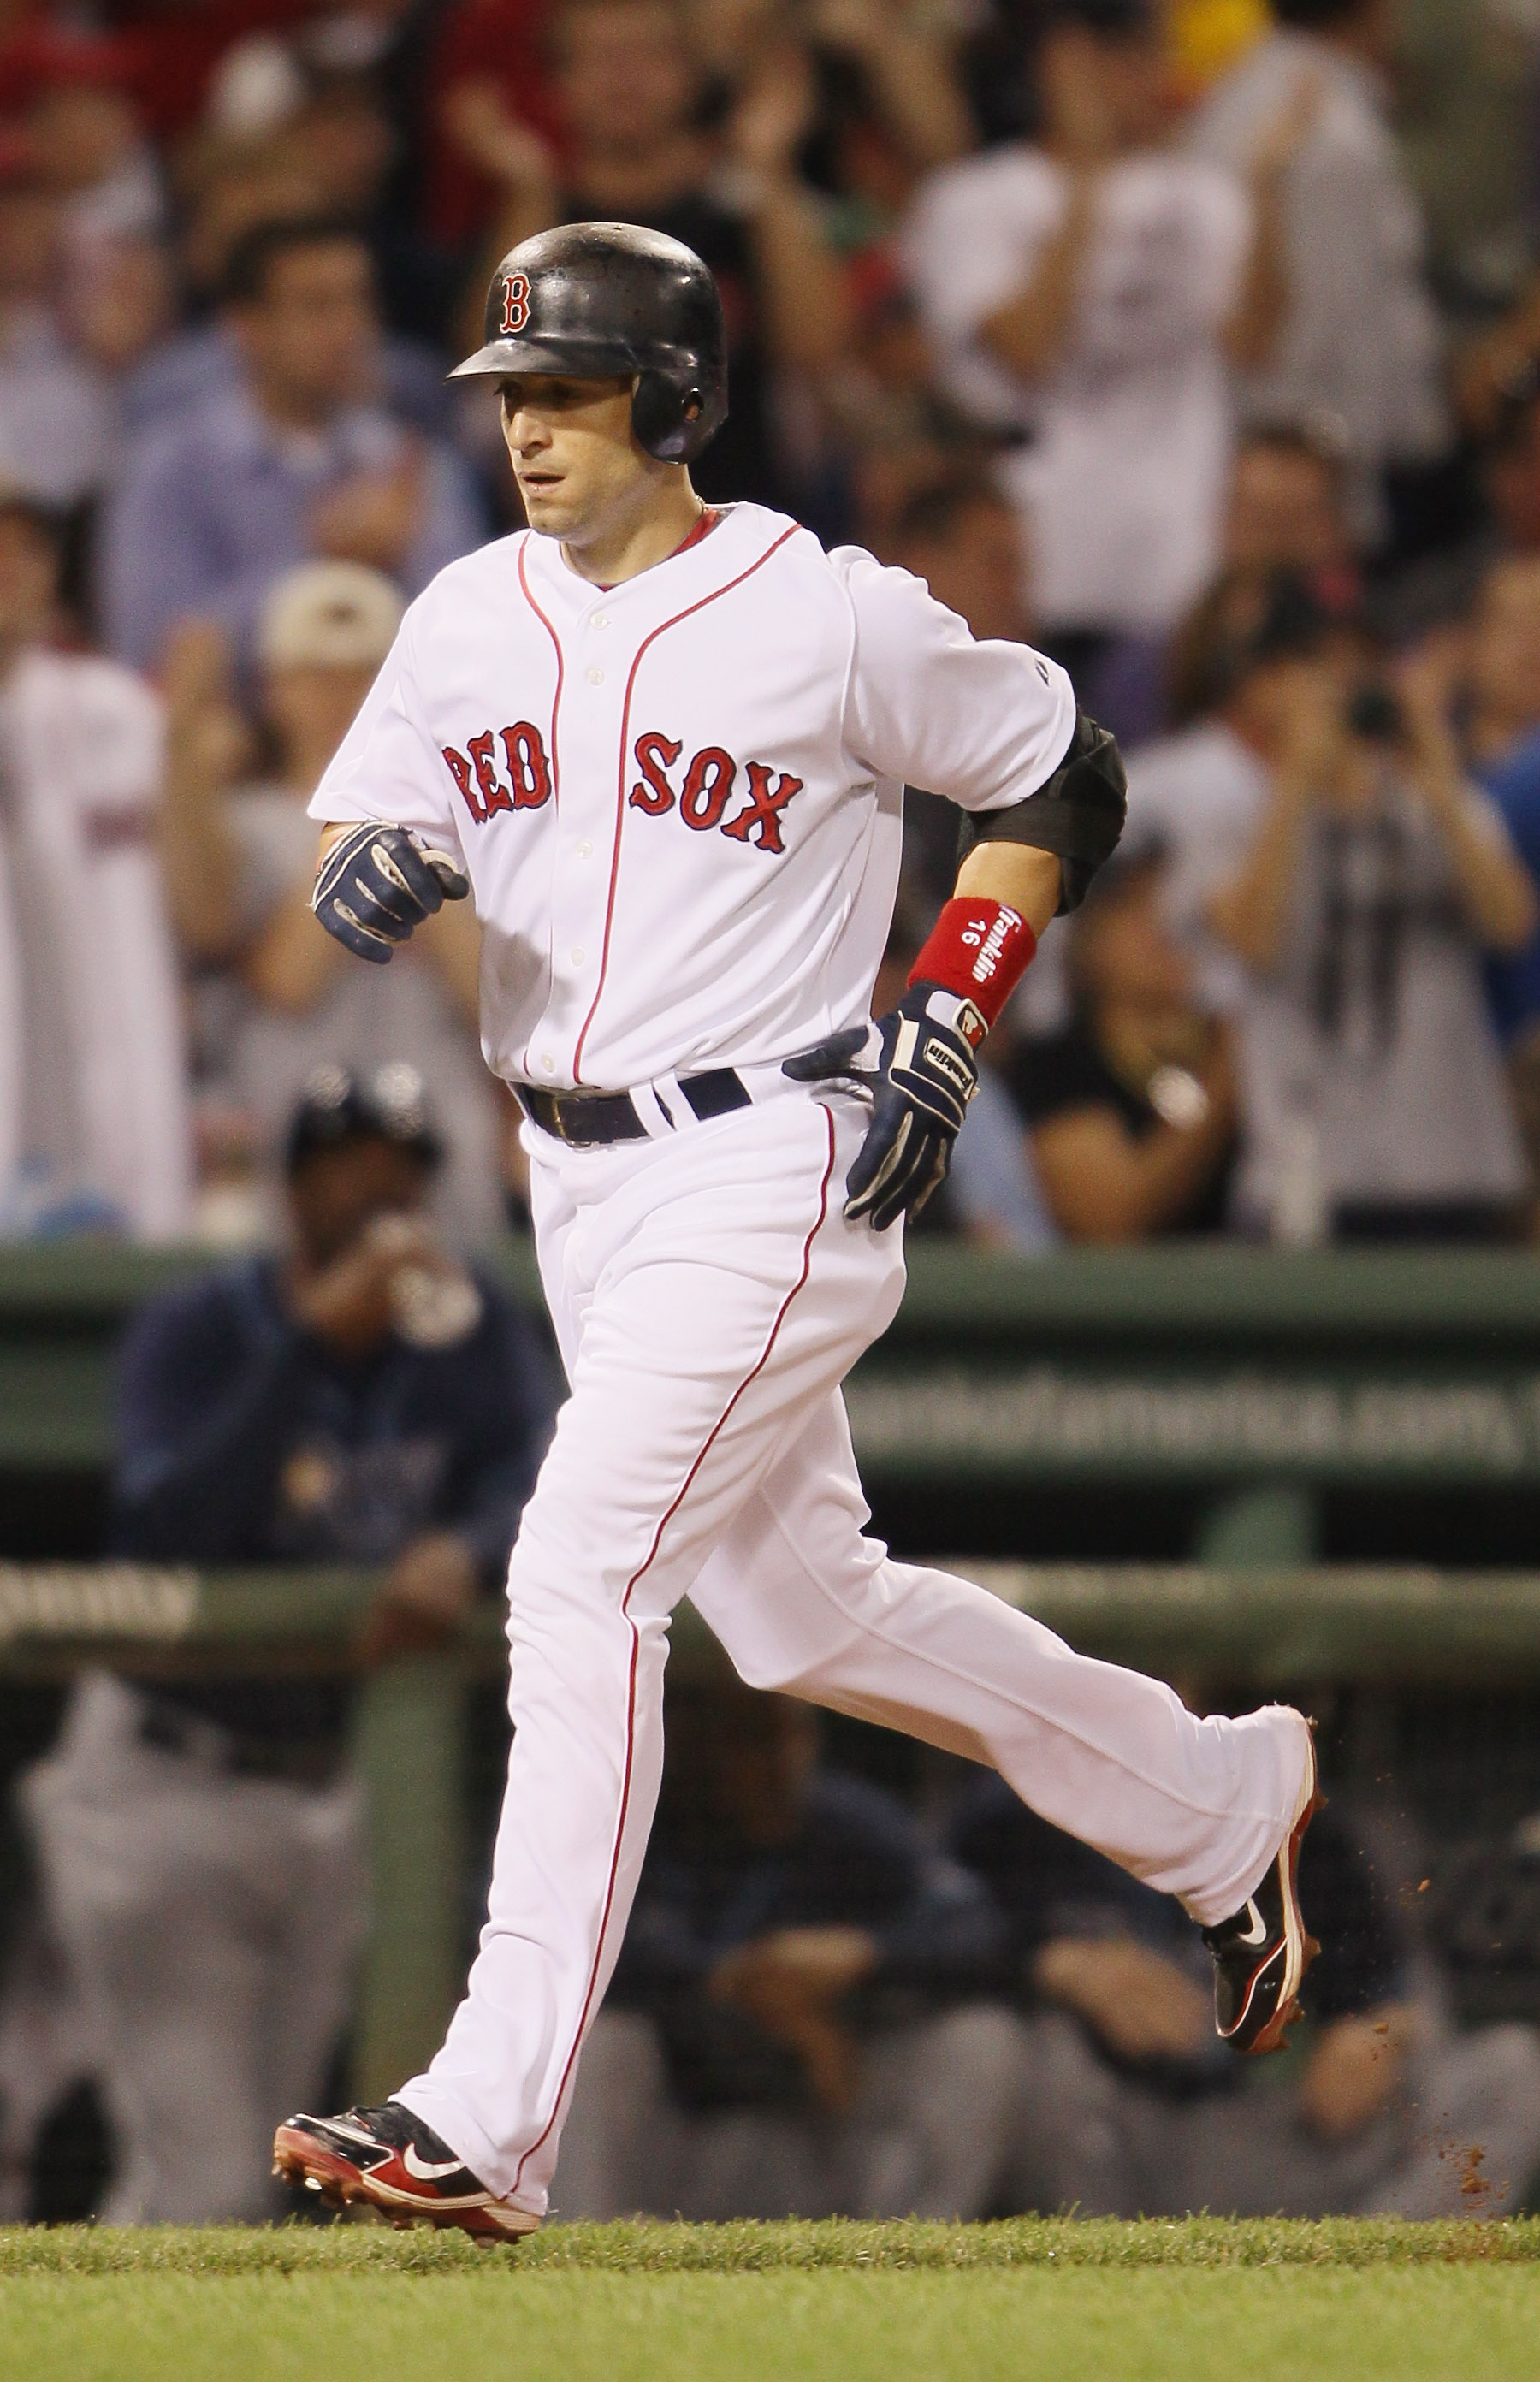 BOSTON - SEPTEMBER 08:  Marco Scutaro #16 of the Boston Red Sox heads for home after he hit a solo home run against the Tampa Bay Rays on September 8, 2010 at Fenway Park in Boston, Massachusetts.  (Photo by Elsa/Getty Images)